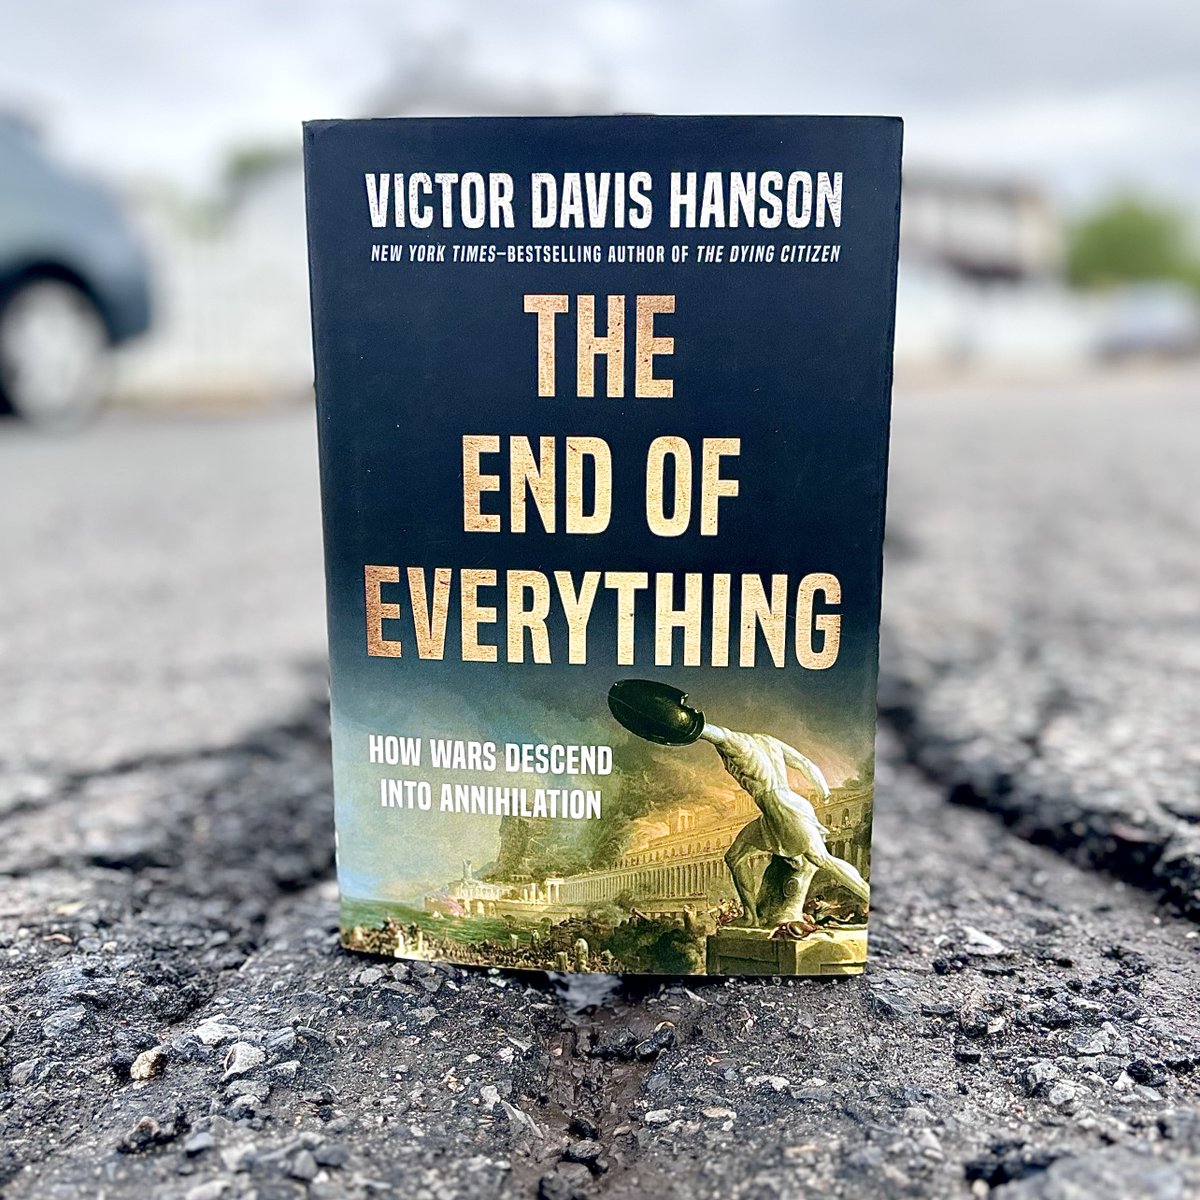 Today we celebrate the release of @VDHanson's THE END OF EVERYTHING🎉 In this “gripping account of catastrophic defeat” (@barrystrauss), a @nytimes–bestselling historian warns that wars of obliteration are possible in our time Grab your copy: bit.ly/4ayD9Uq